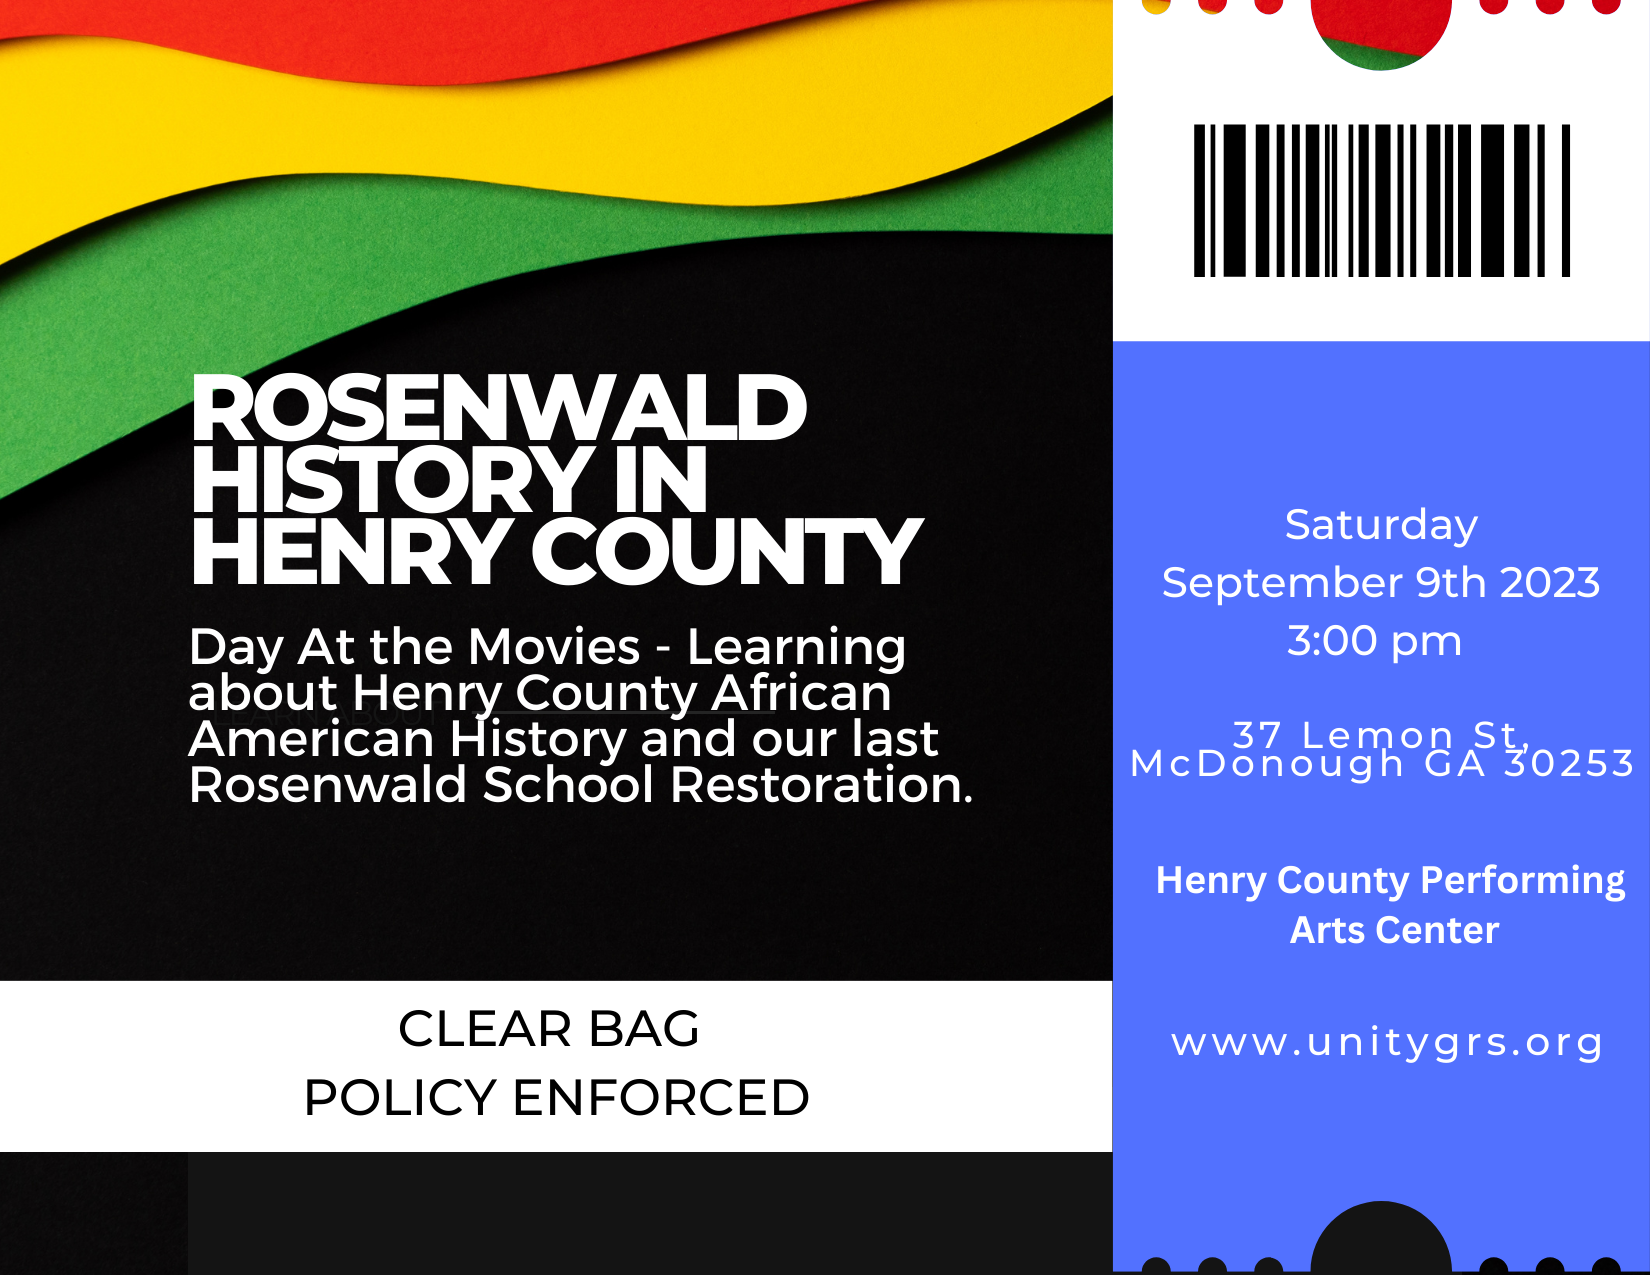 Henry County Arts & Culture Alliance - Learn About Rosenwald Schools in Henry County.